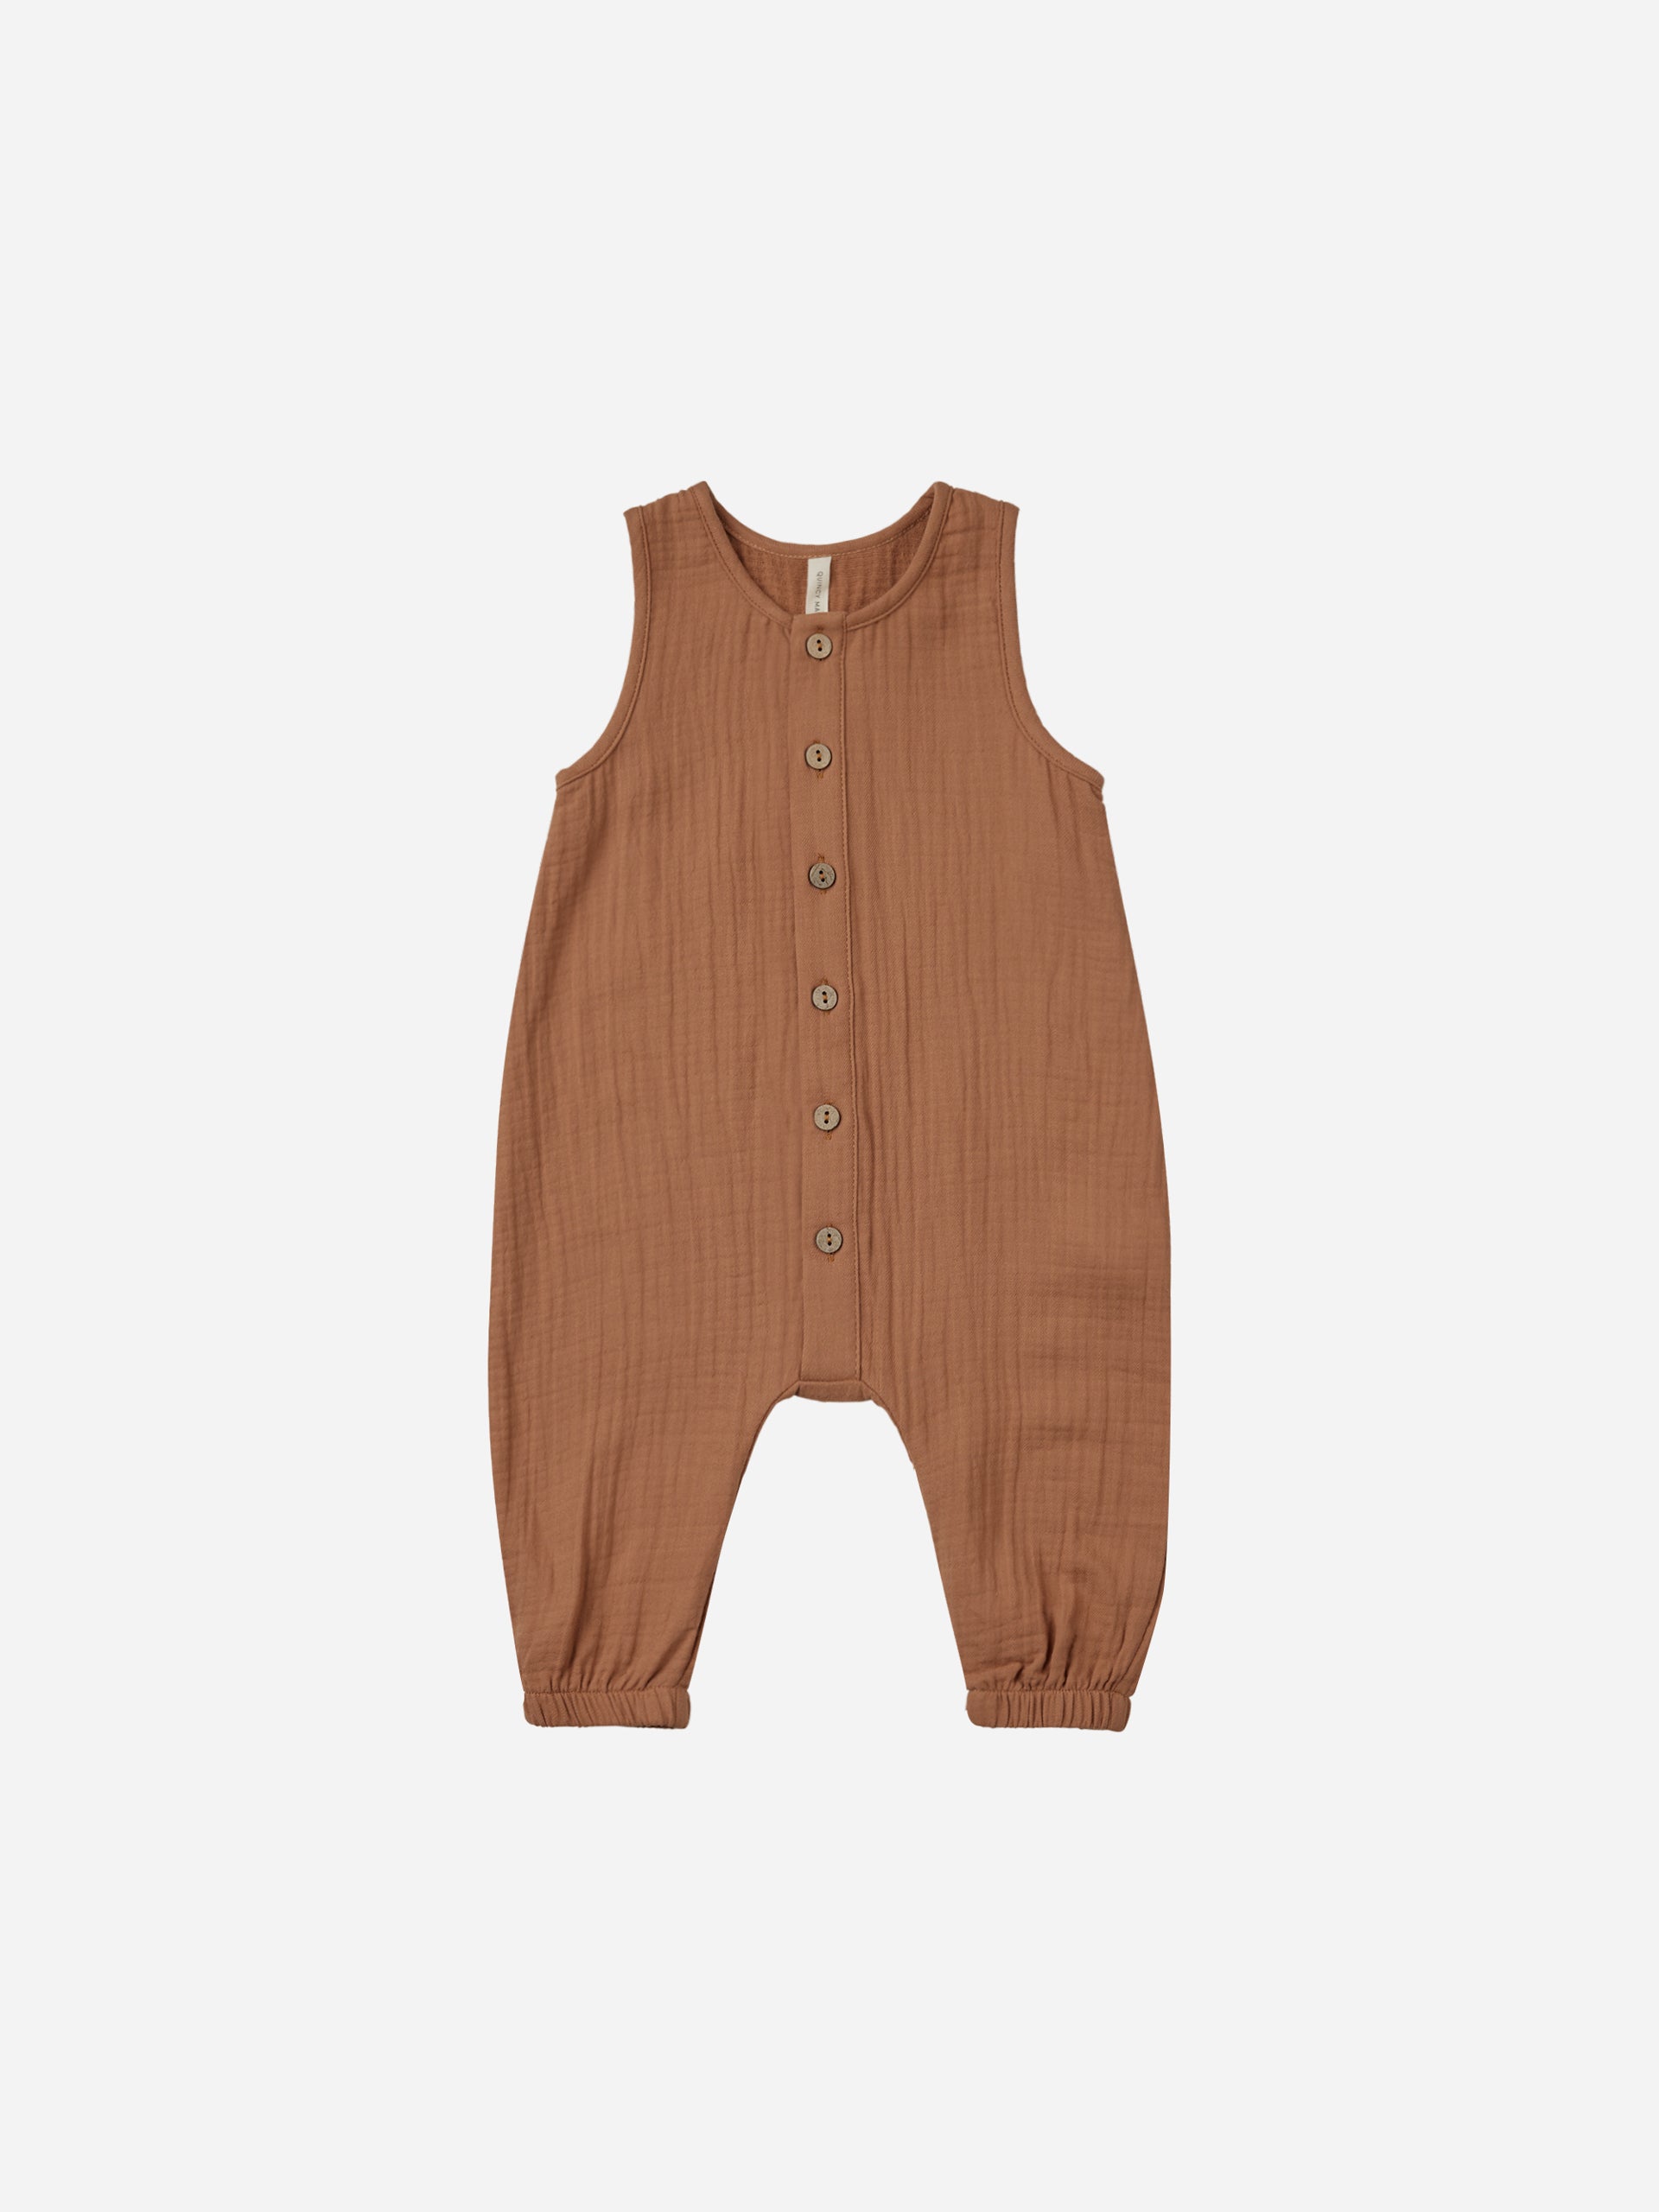 Woven Jumpsuit || Clay - Rylee + Cru | Kids Clothes | Trendy Baby Clothes | Modern Infant Outfits |